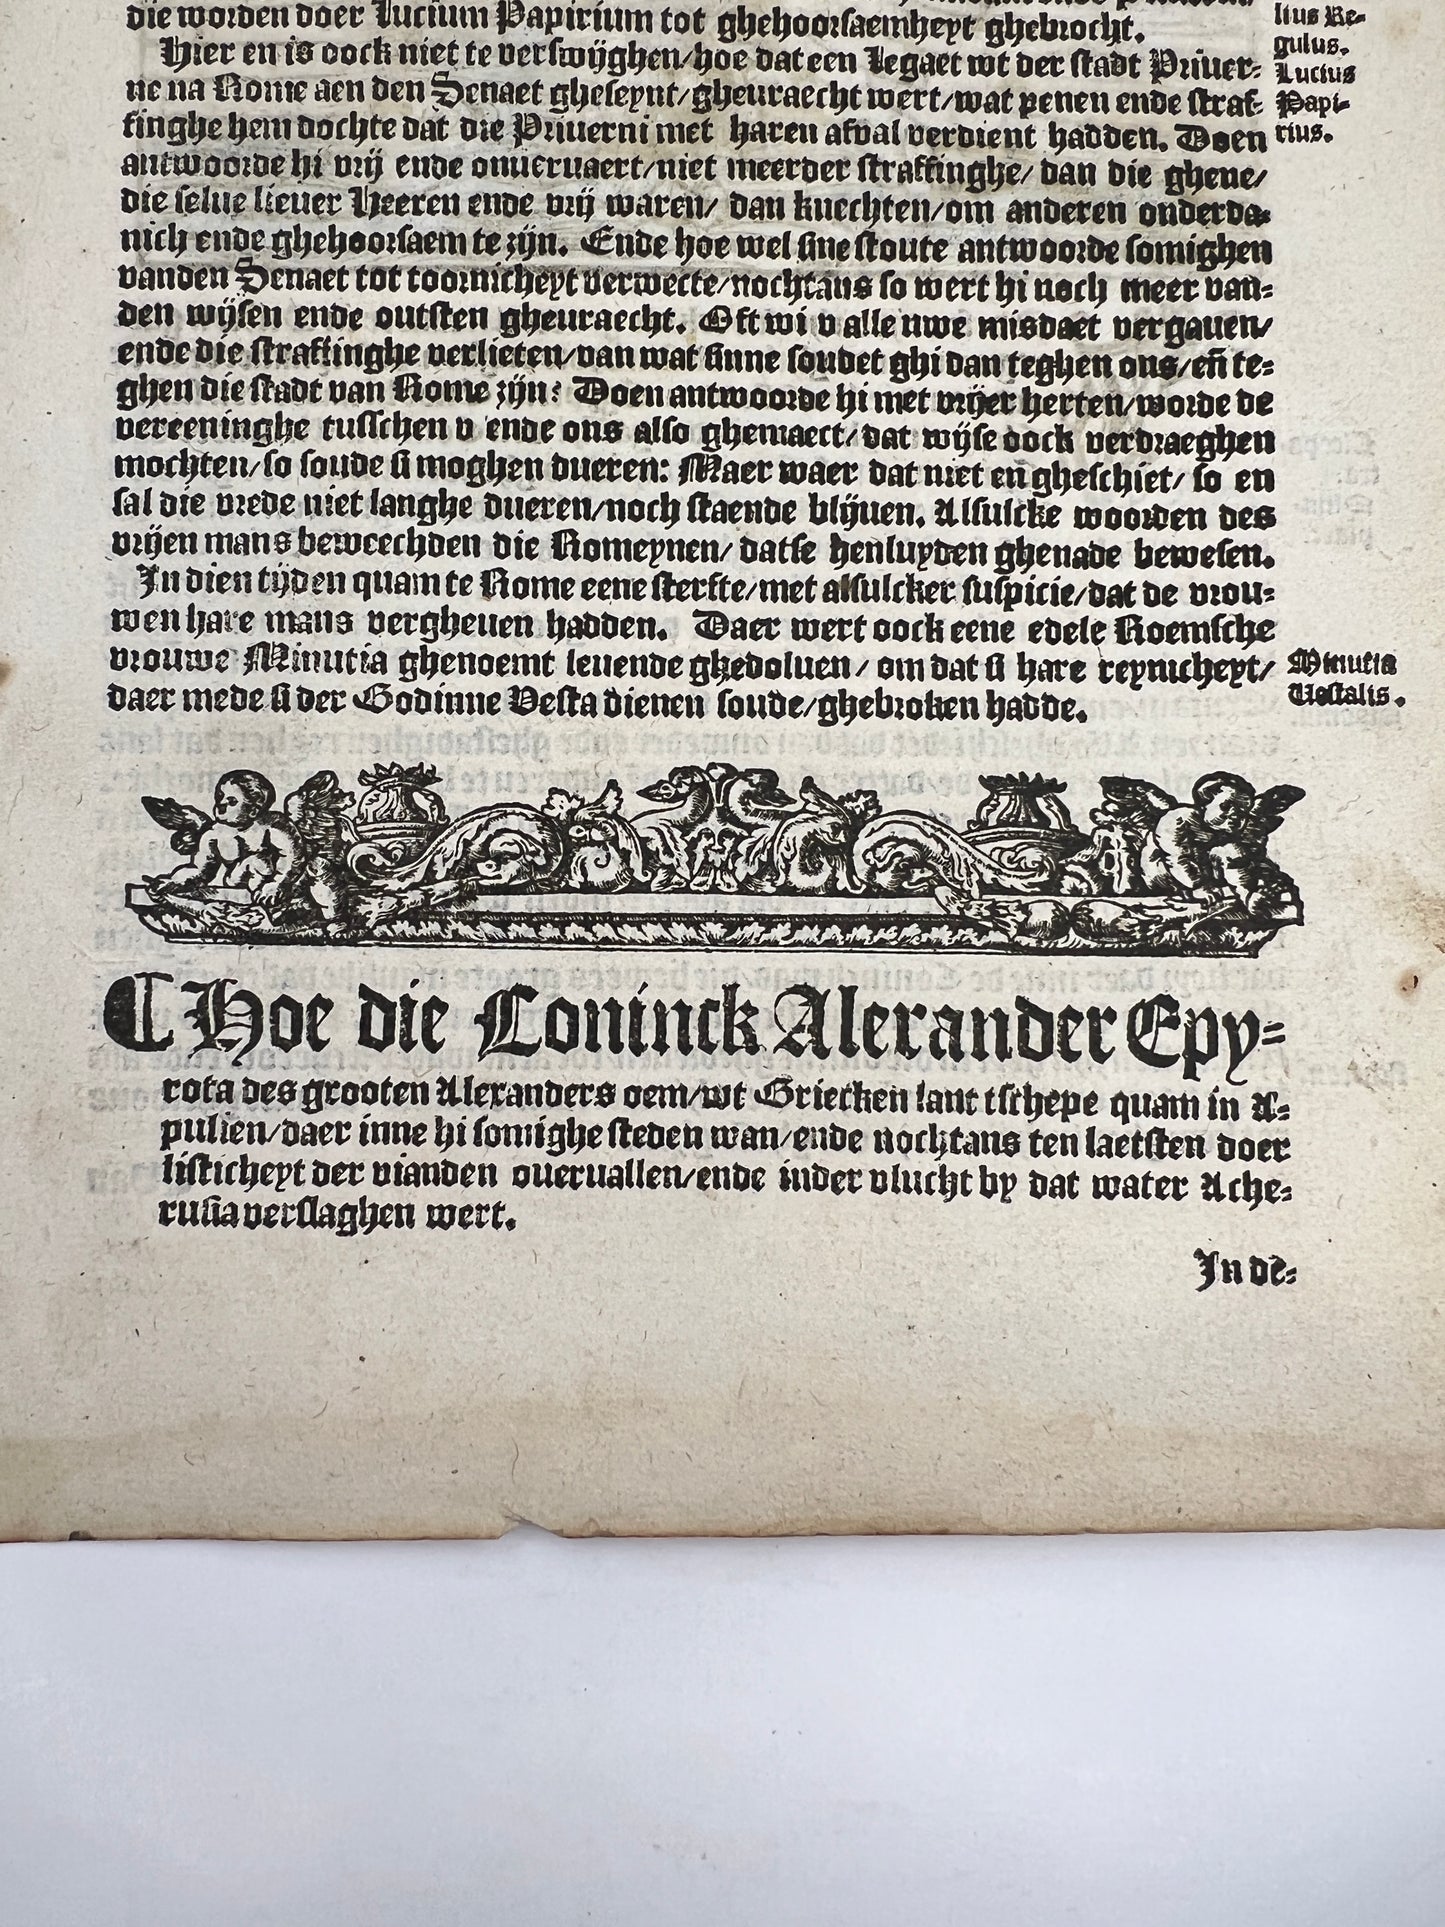 1541 Folio Leaf with 2 Woodcuts: Livy's History of Rome - Alexander the Great, Sea Battle with the Greeks